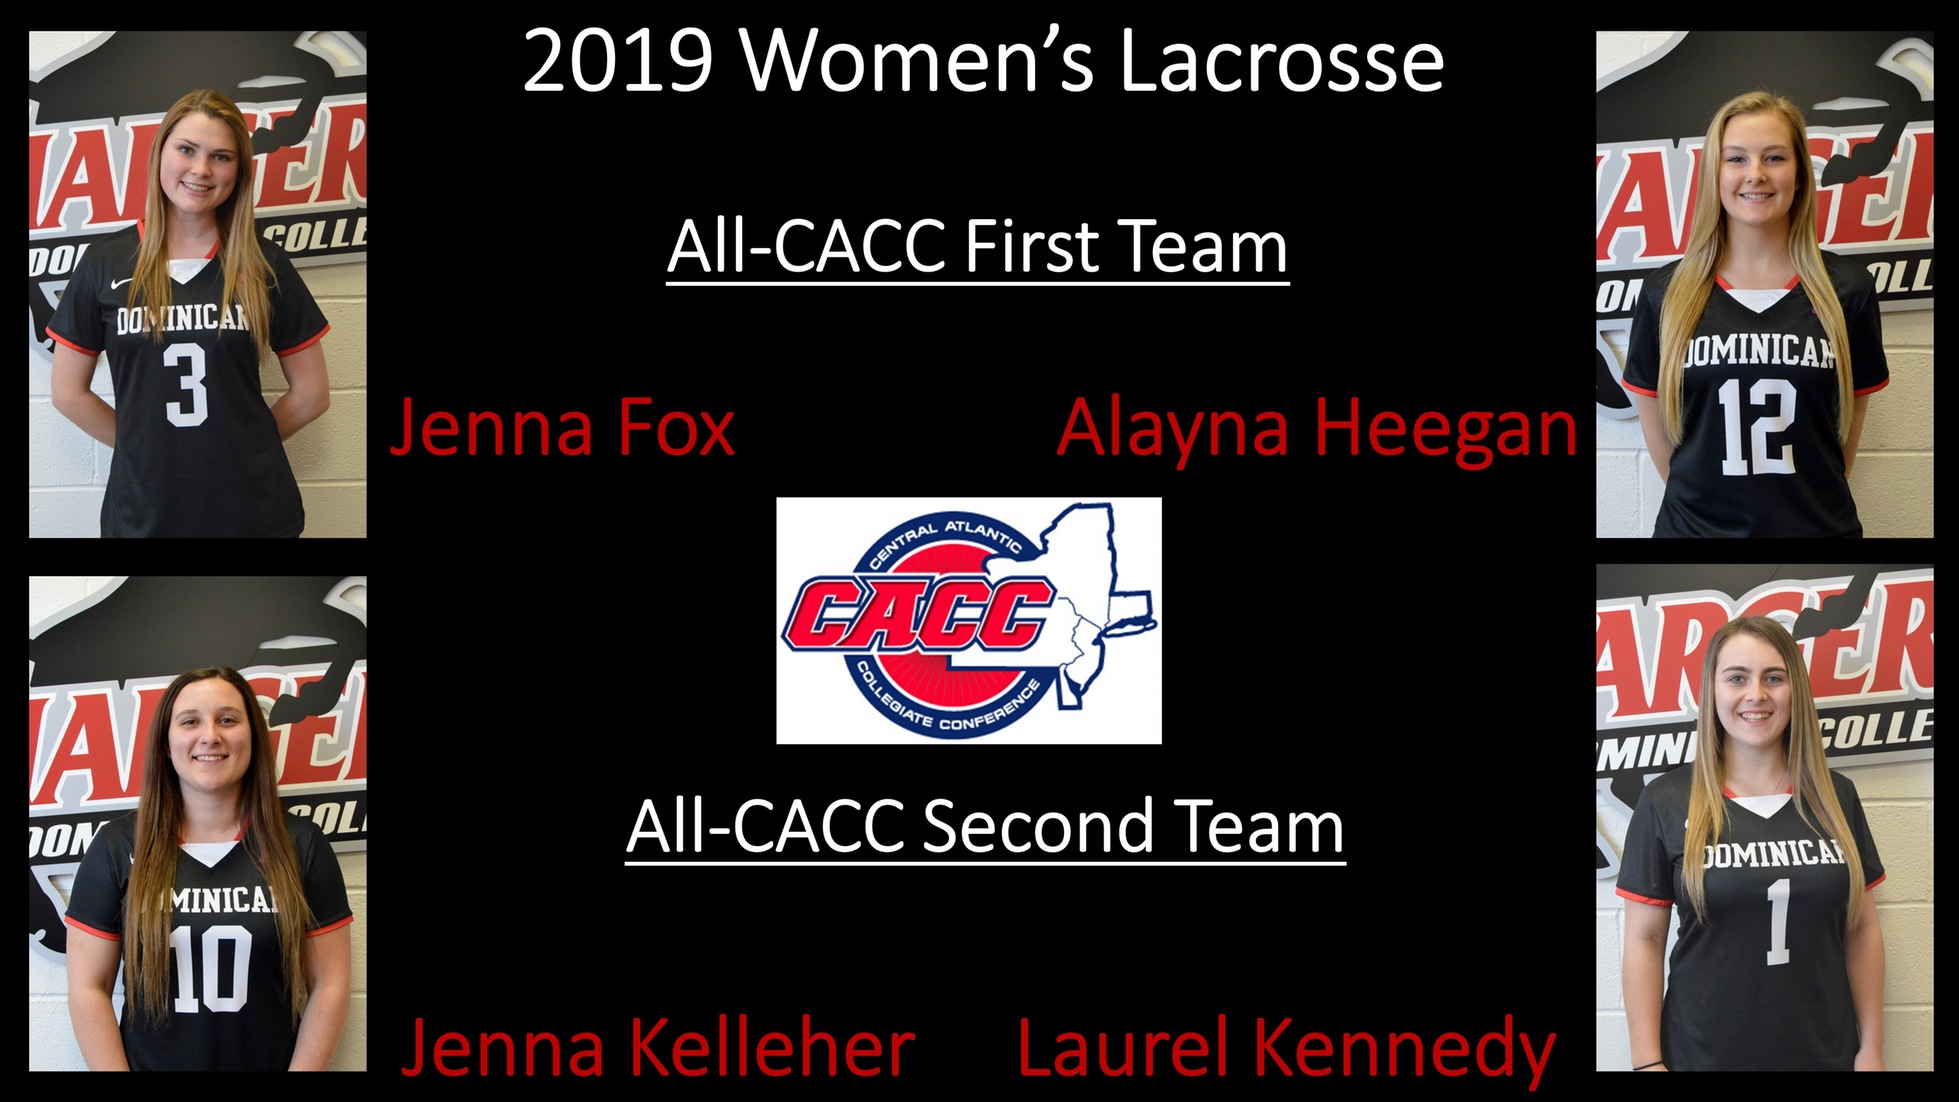 FOUR LADY CHARGERS EARN ALL-CACC WOMEN'S LACROSSE HONORS